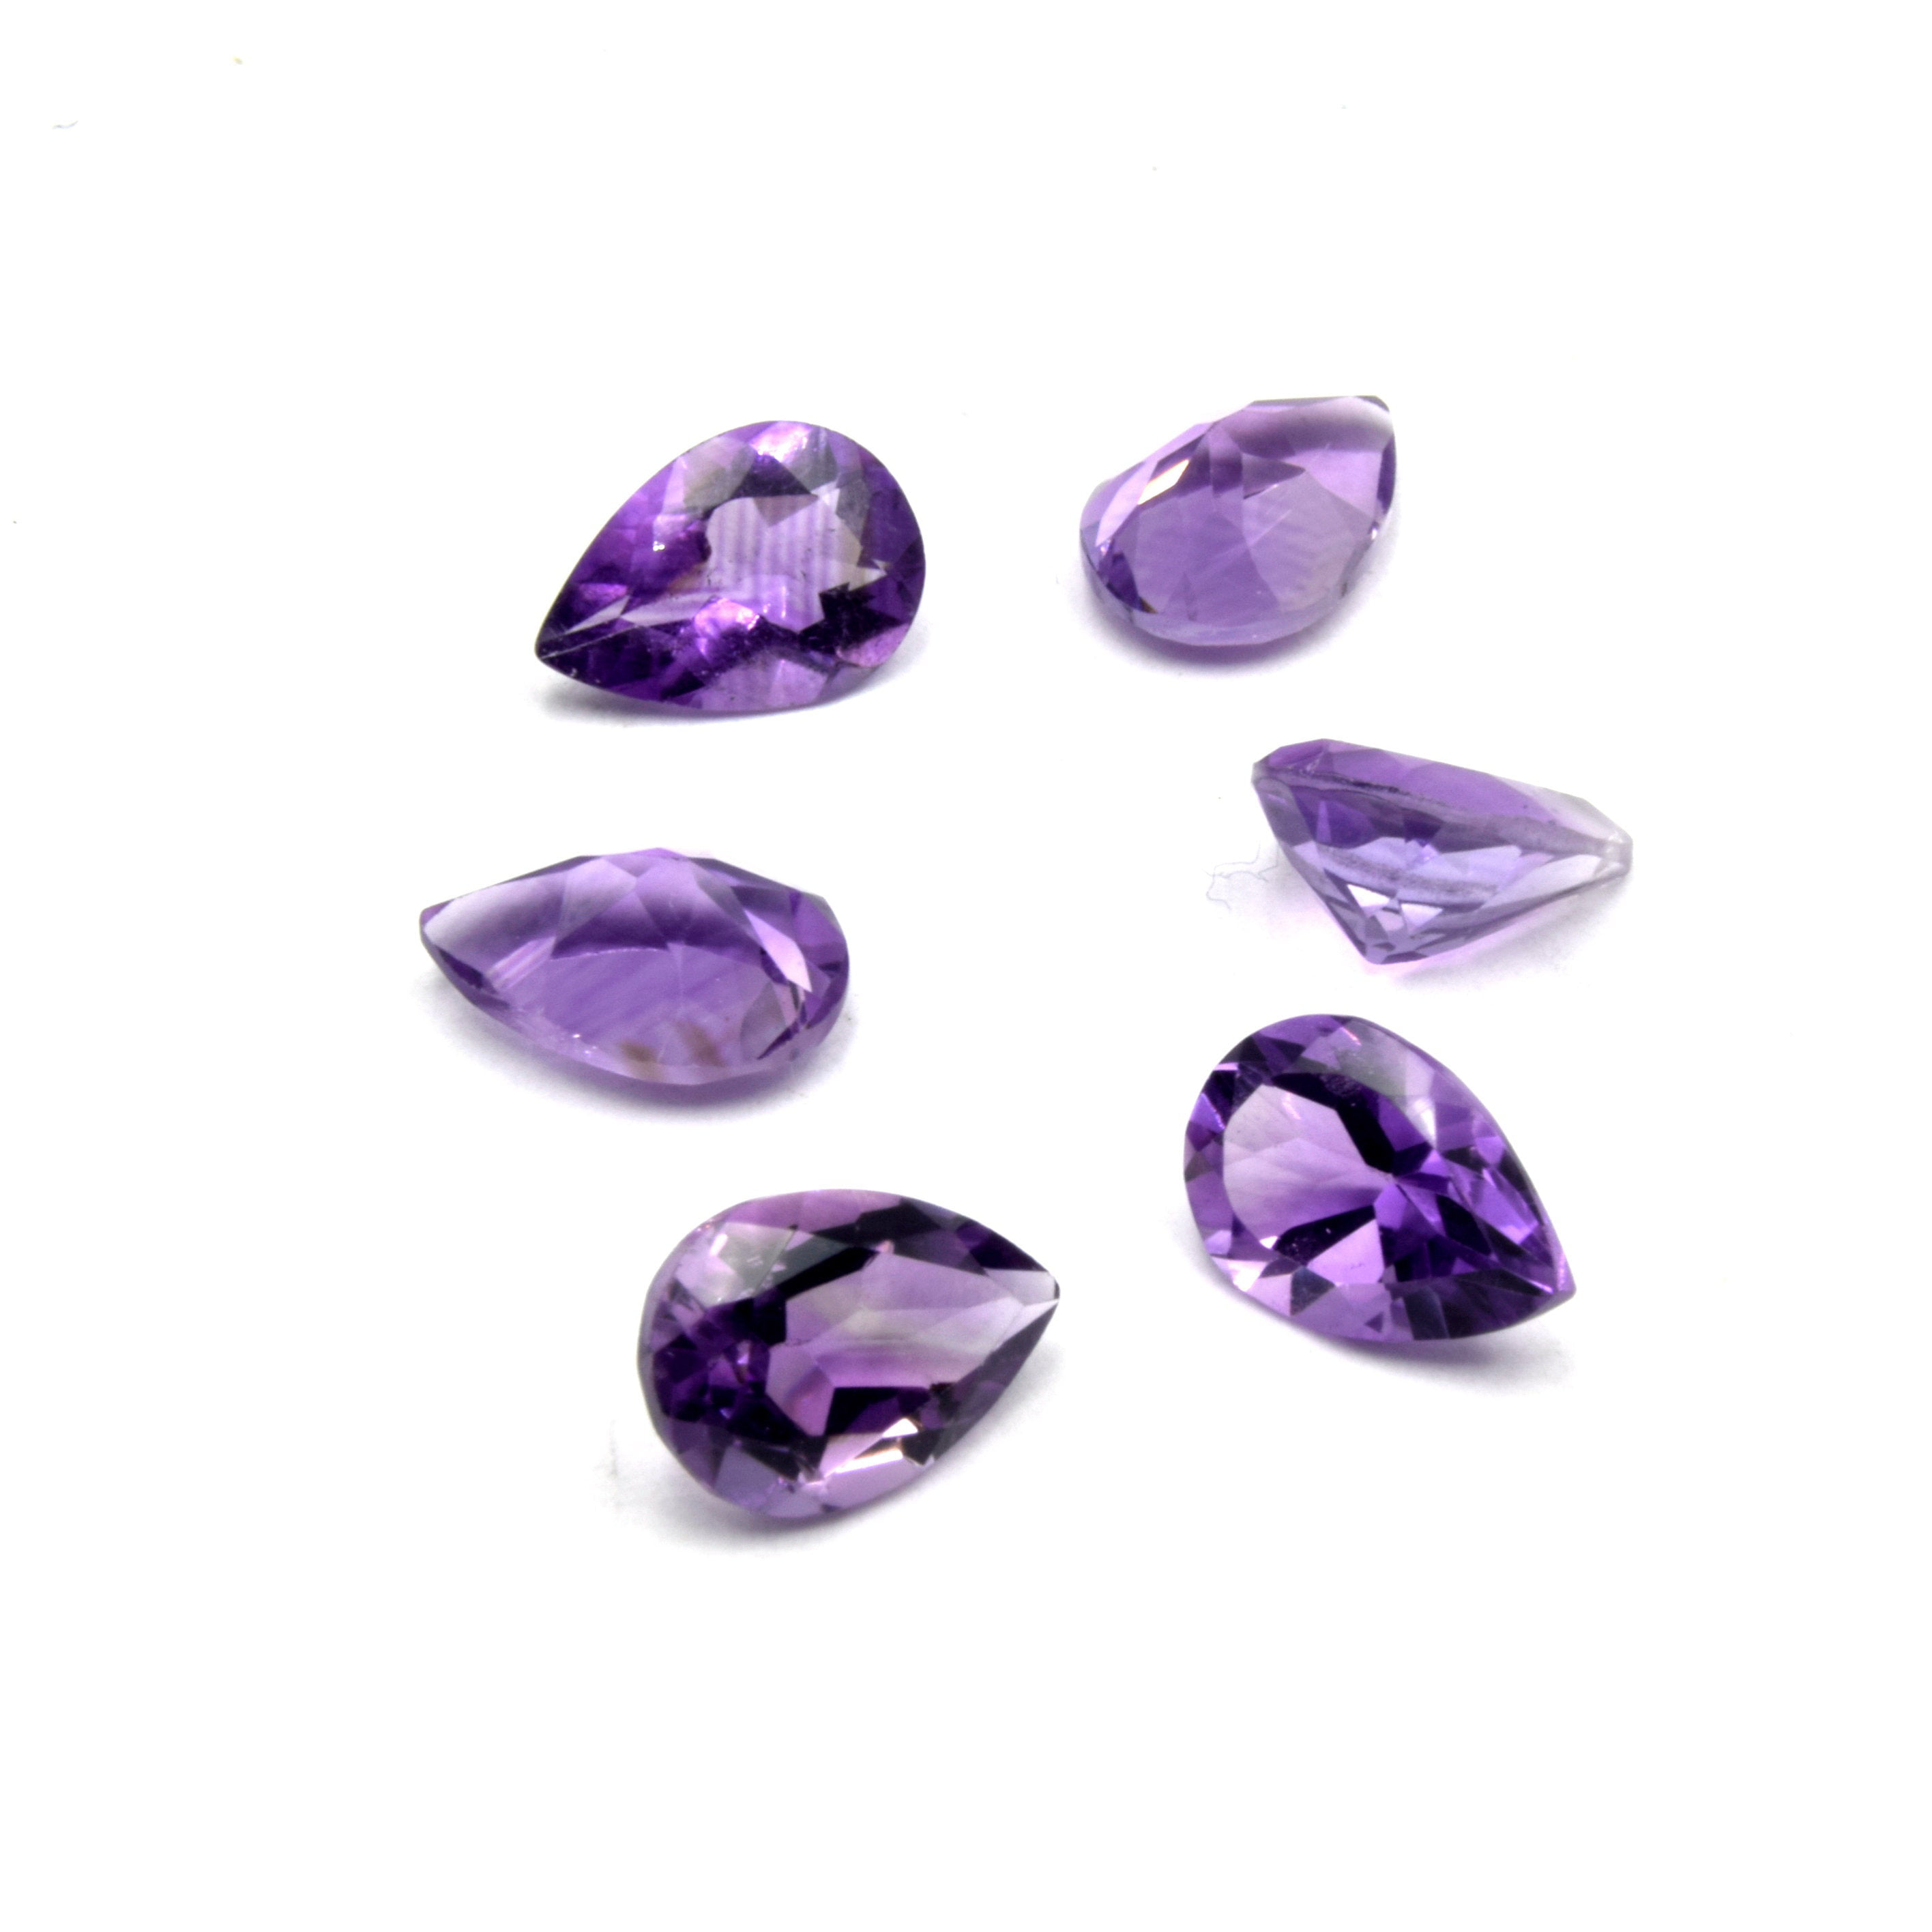 round faceted cut Amethyst loose gemstone various sizes